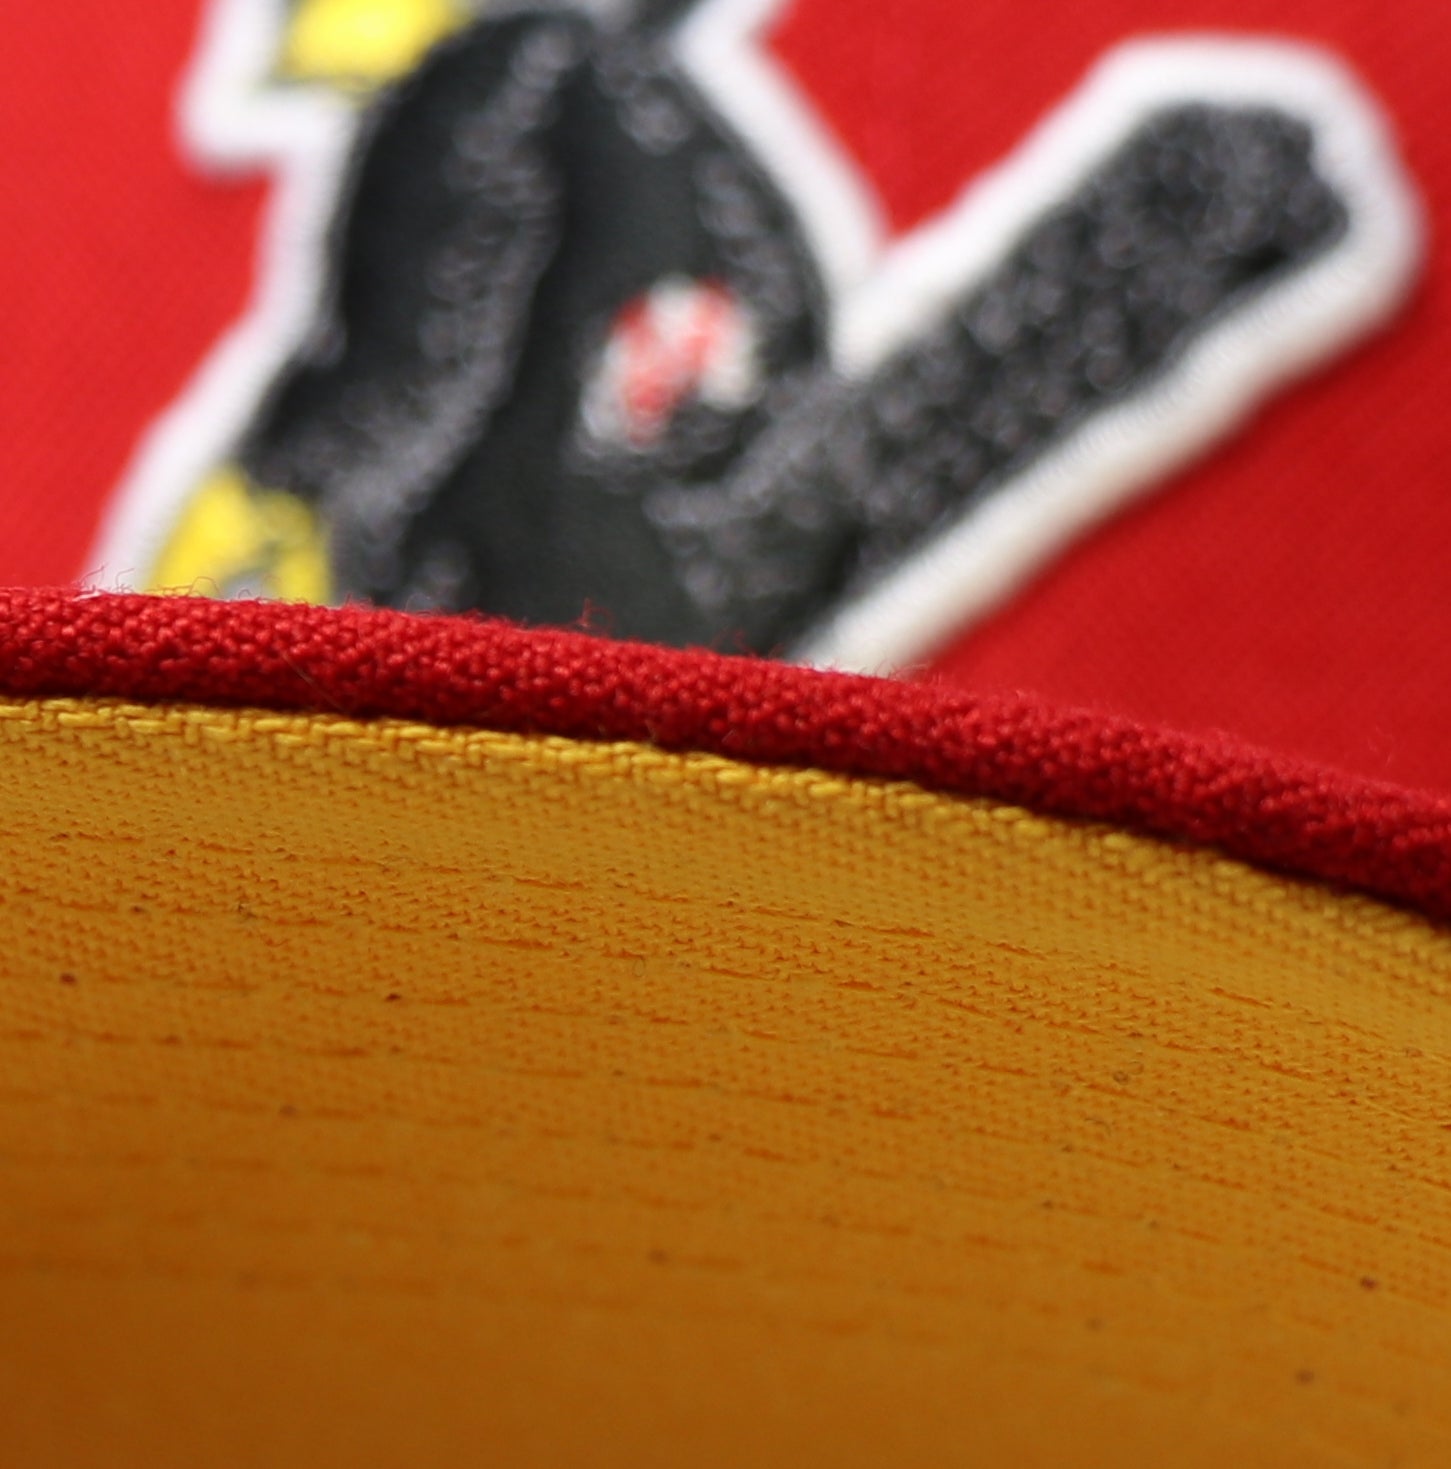 ST. LOUIS CARDINALS (125TH ANNIVERSARY) NEW ERA 59FIFTY FITTED (YELLOW UNDER VISOR)